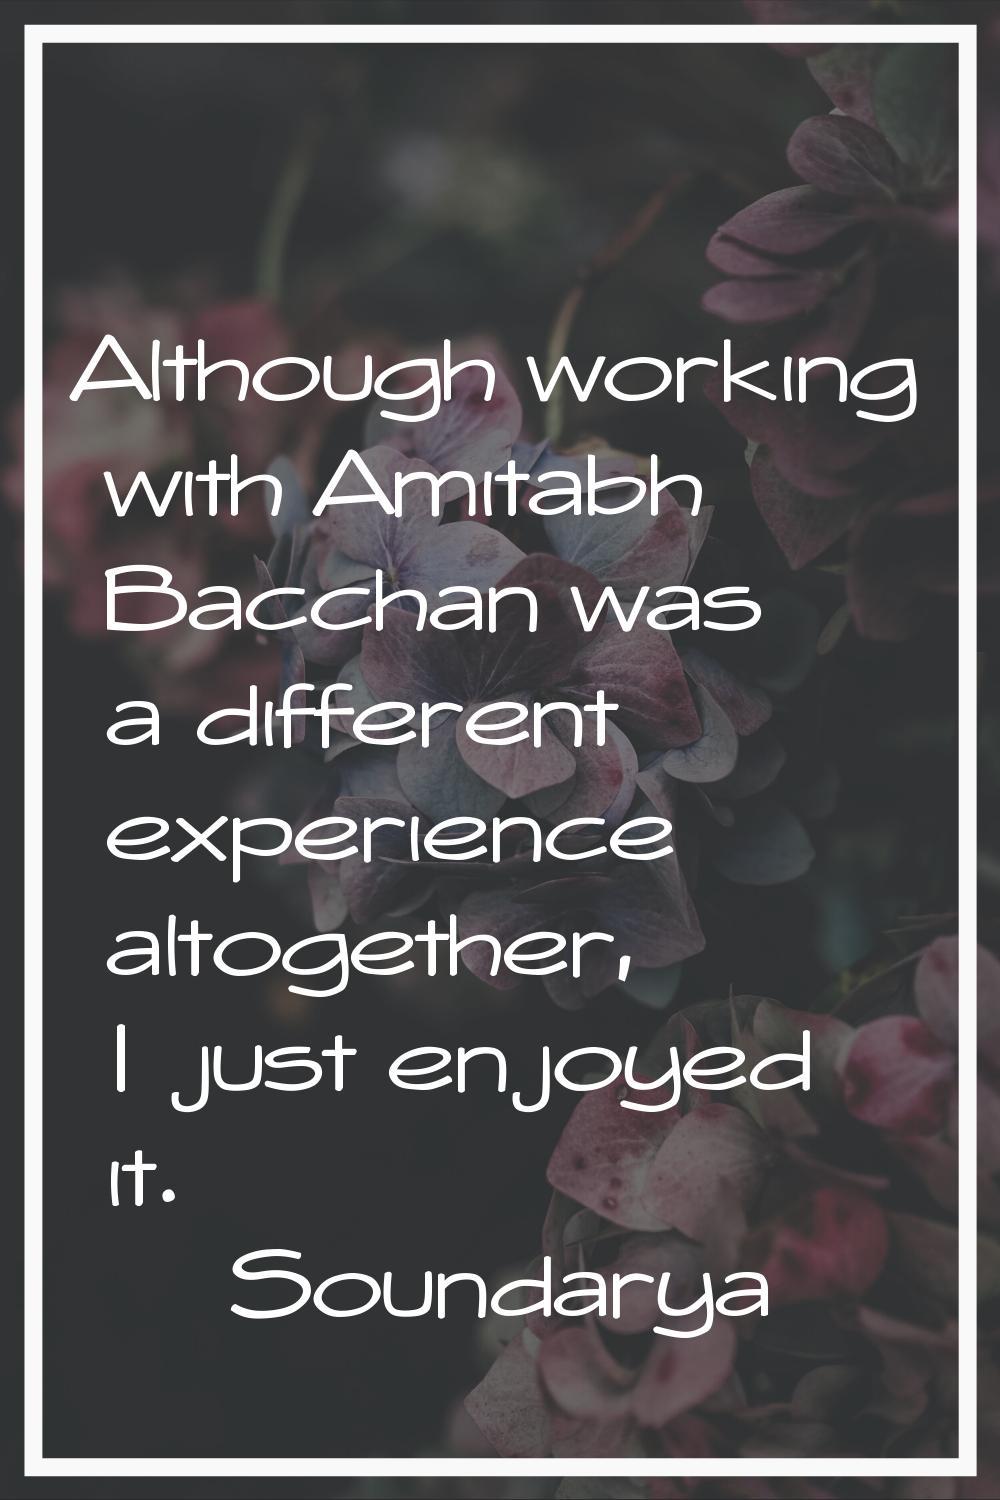 Although working with Amitabh Bacchan was a different experience altogether, I just enjoyed it.